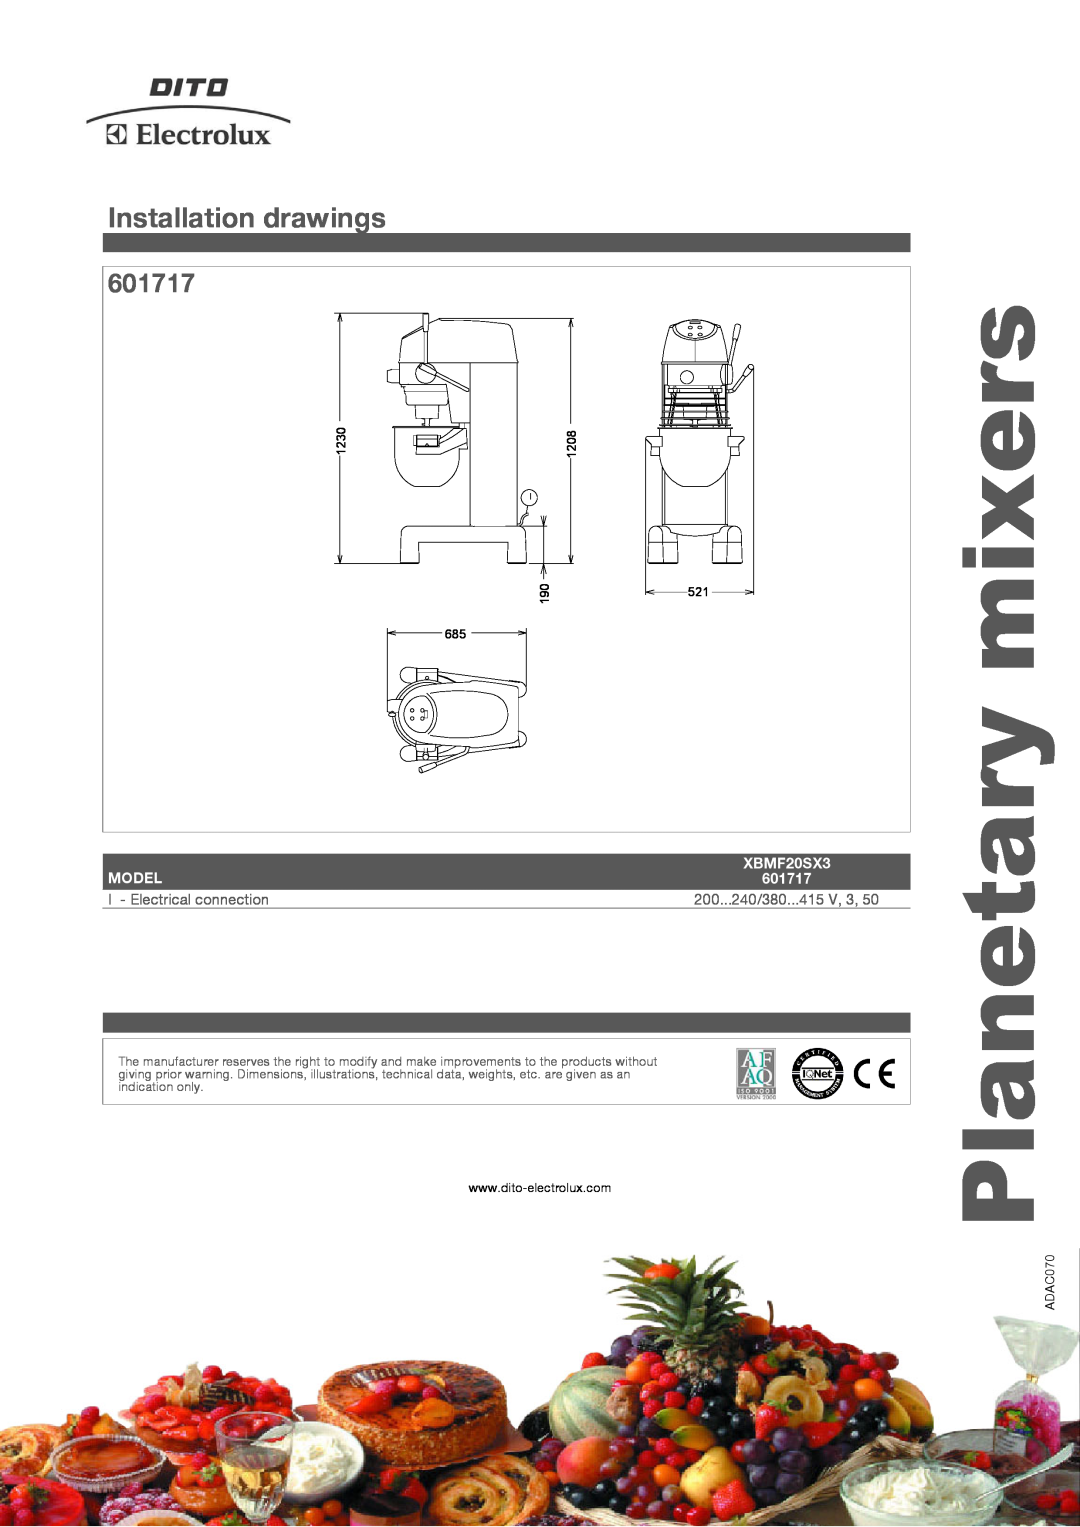 Electrolux XBMF20SX3 manual Installation drawings, 601717, Planetary mixers, Model, I - Electrical connection, 1230, 1208 